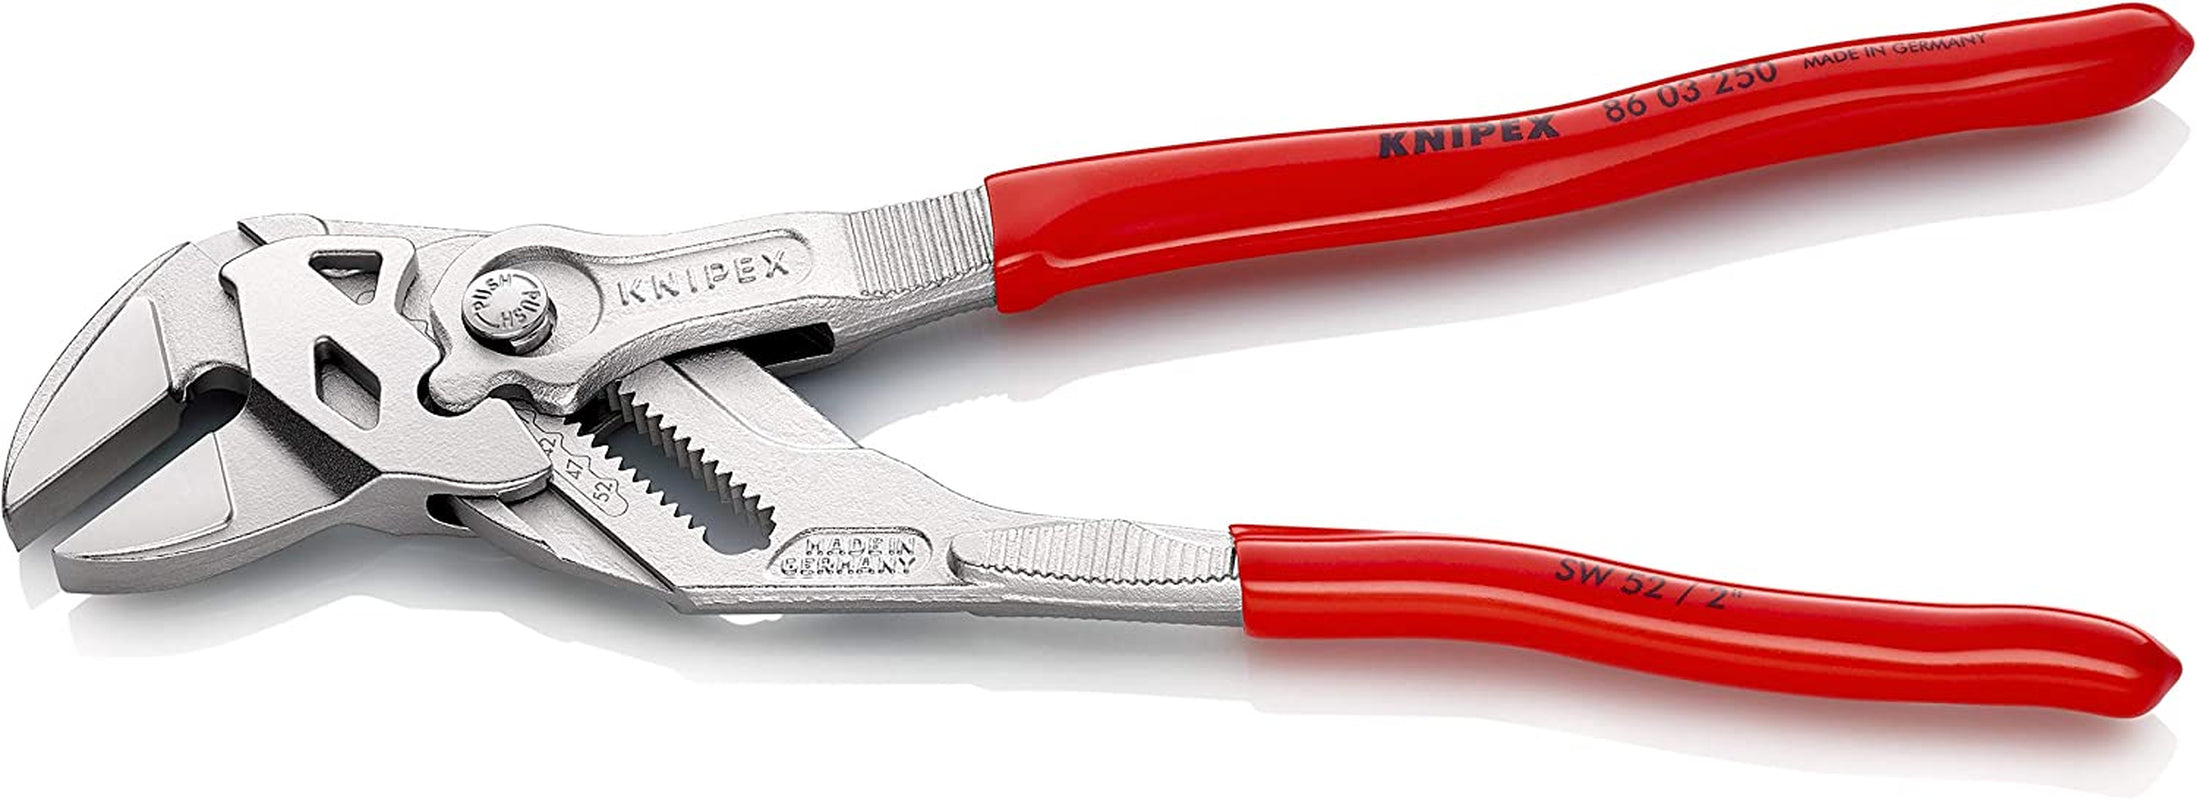 KNIPEX, KNIPEX Pliers Wrench Pliers and a Wrench in a Single Tool (250 Mm) 86 03 250